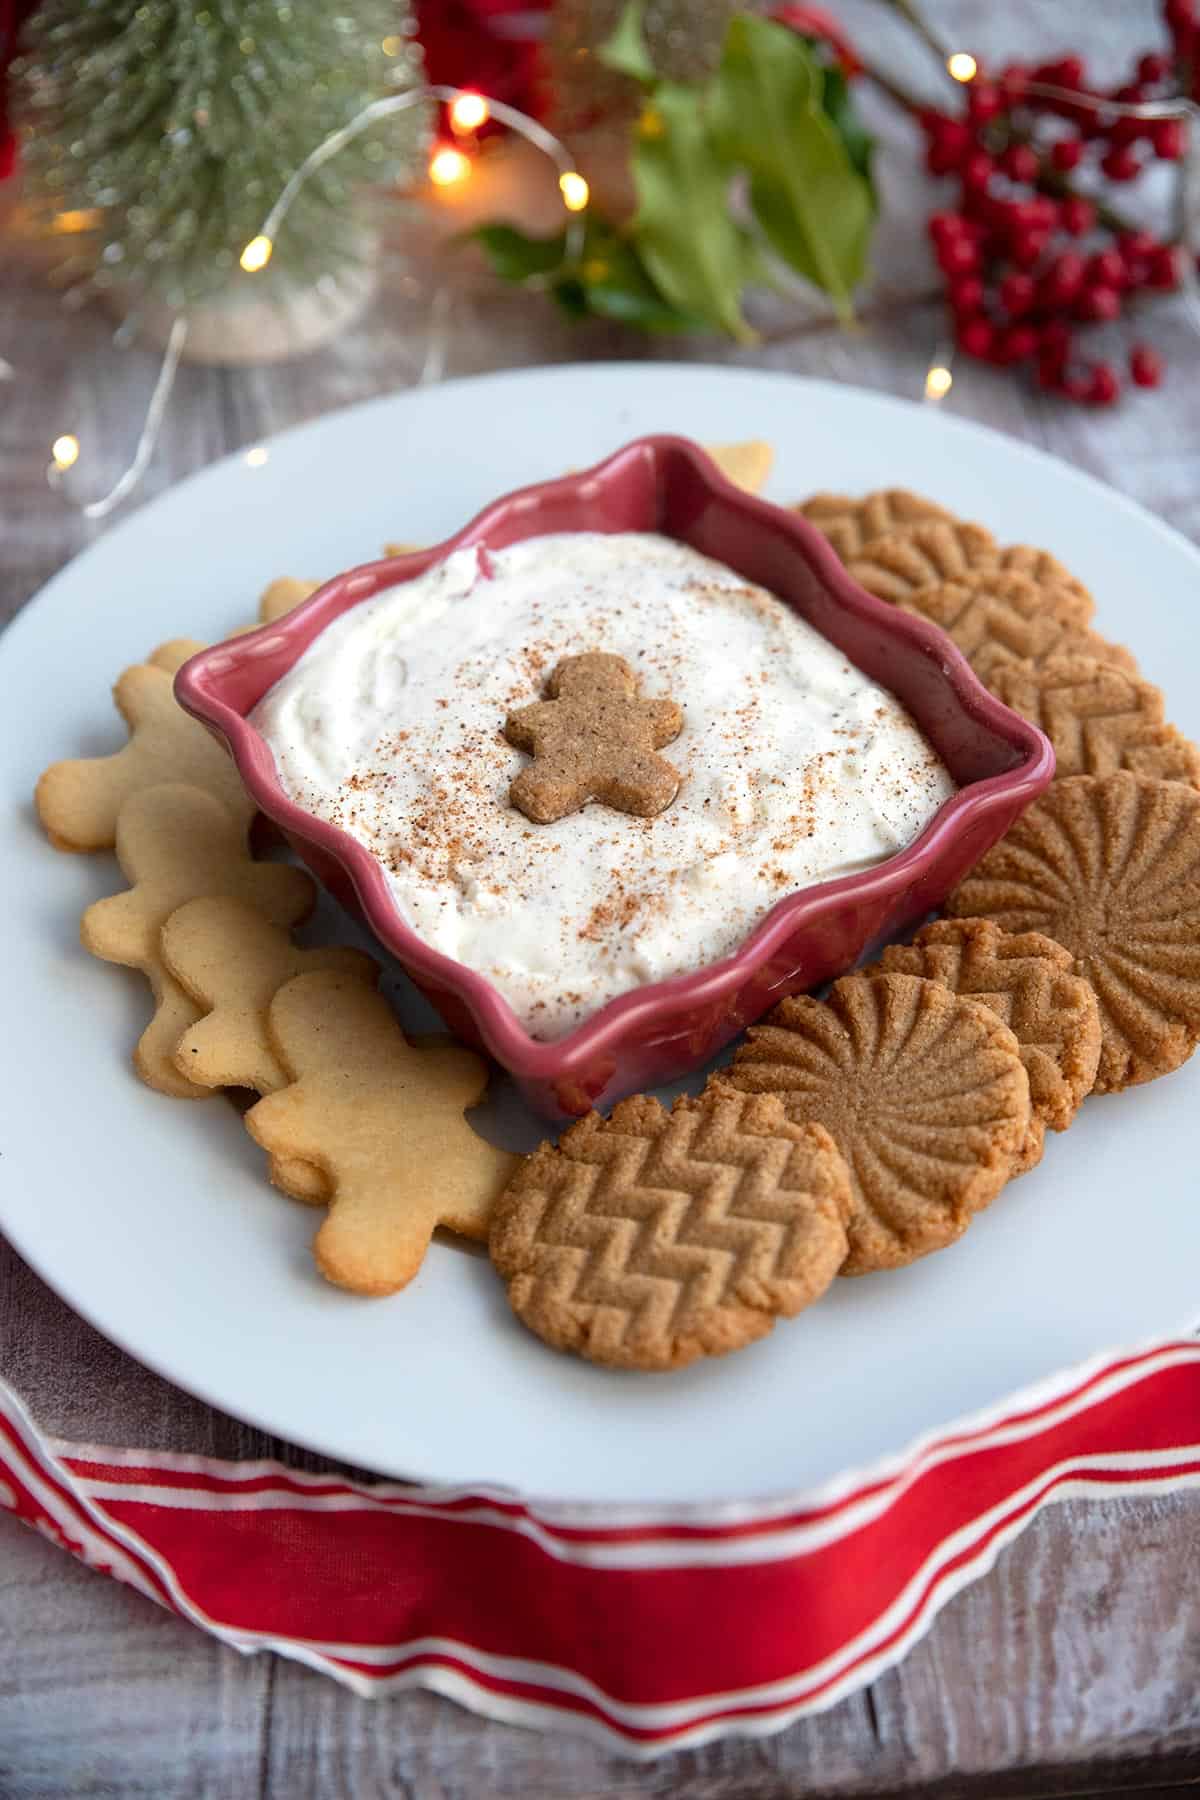 Keto Eggnog Dessert Dip in a red bowl surrounded by keto cookies.